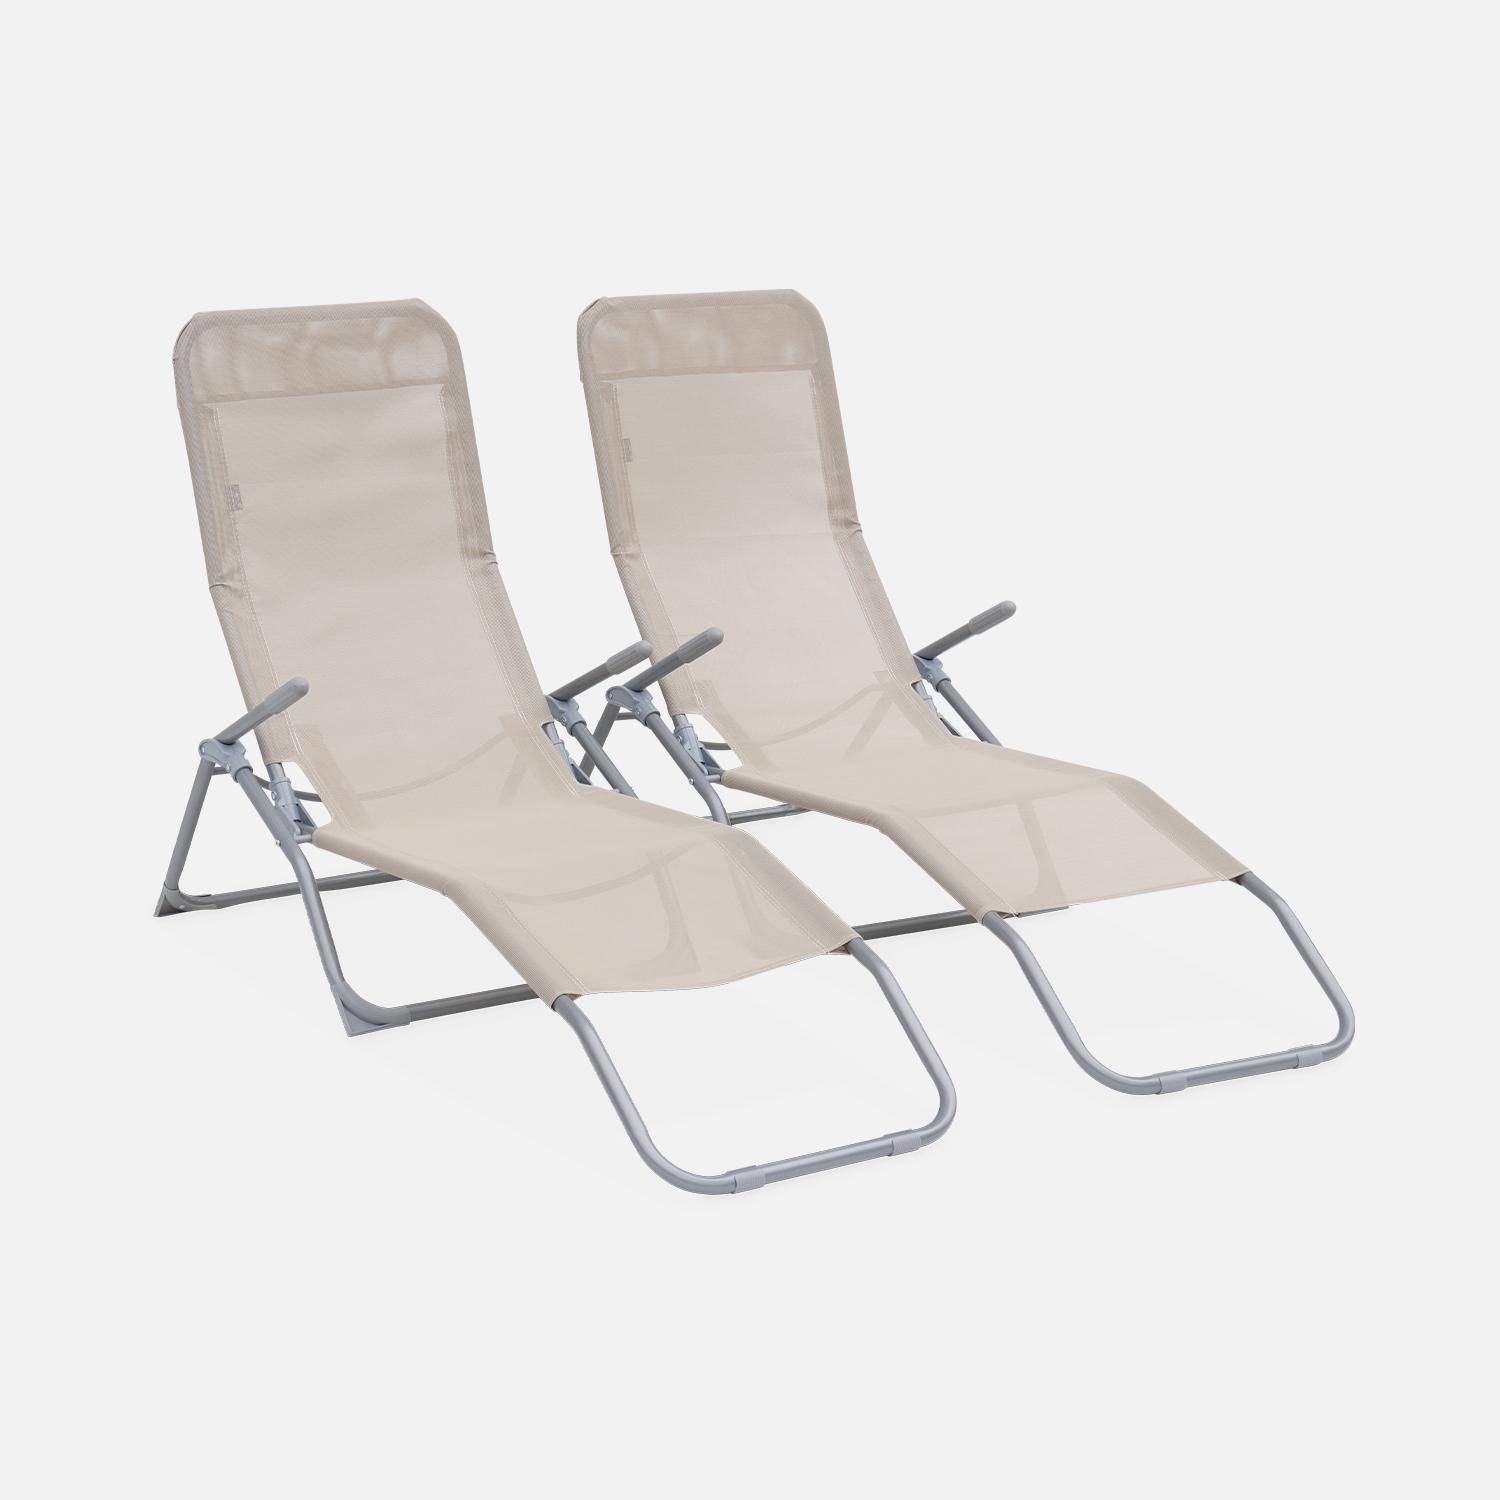 Set of 2 textilene sun loungers - 2 positions - Levito - Taupe,sweeek,Photo3